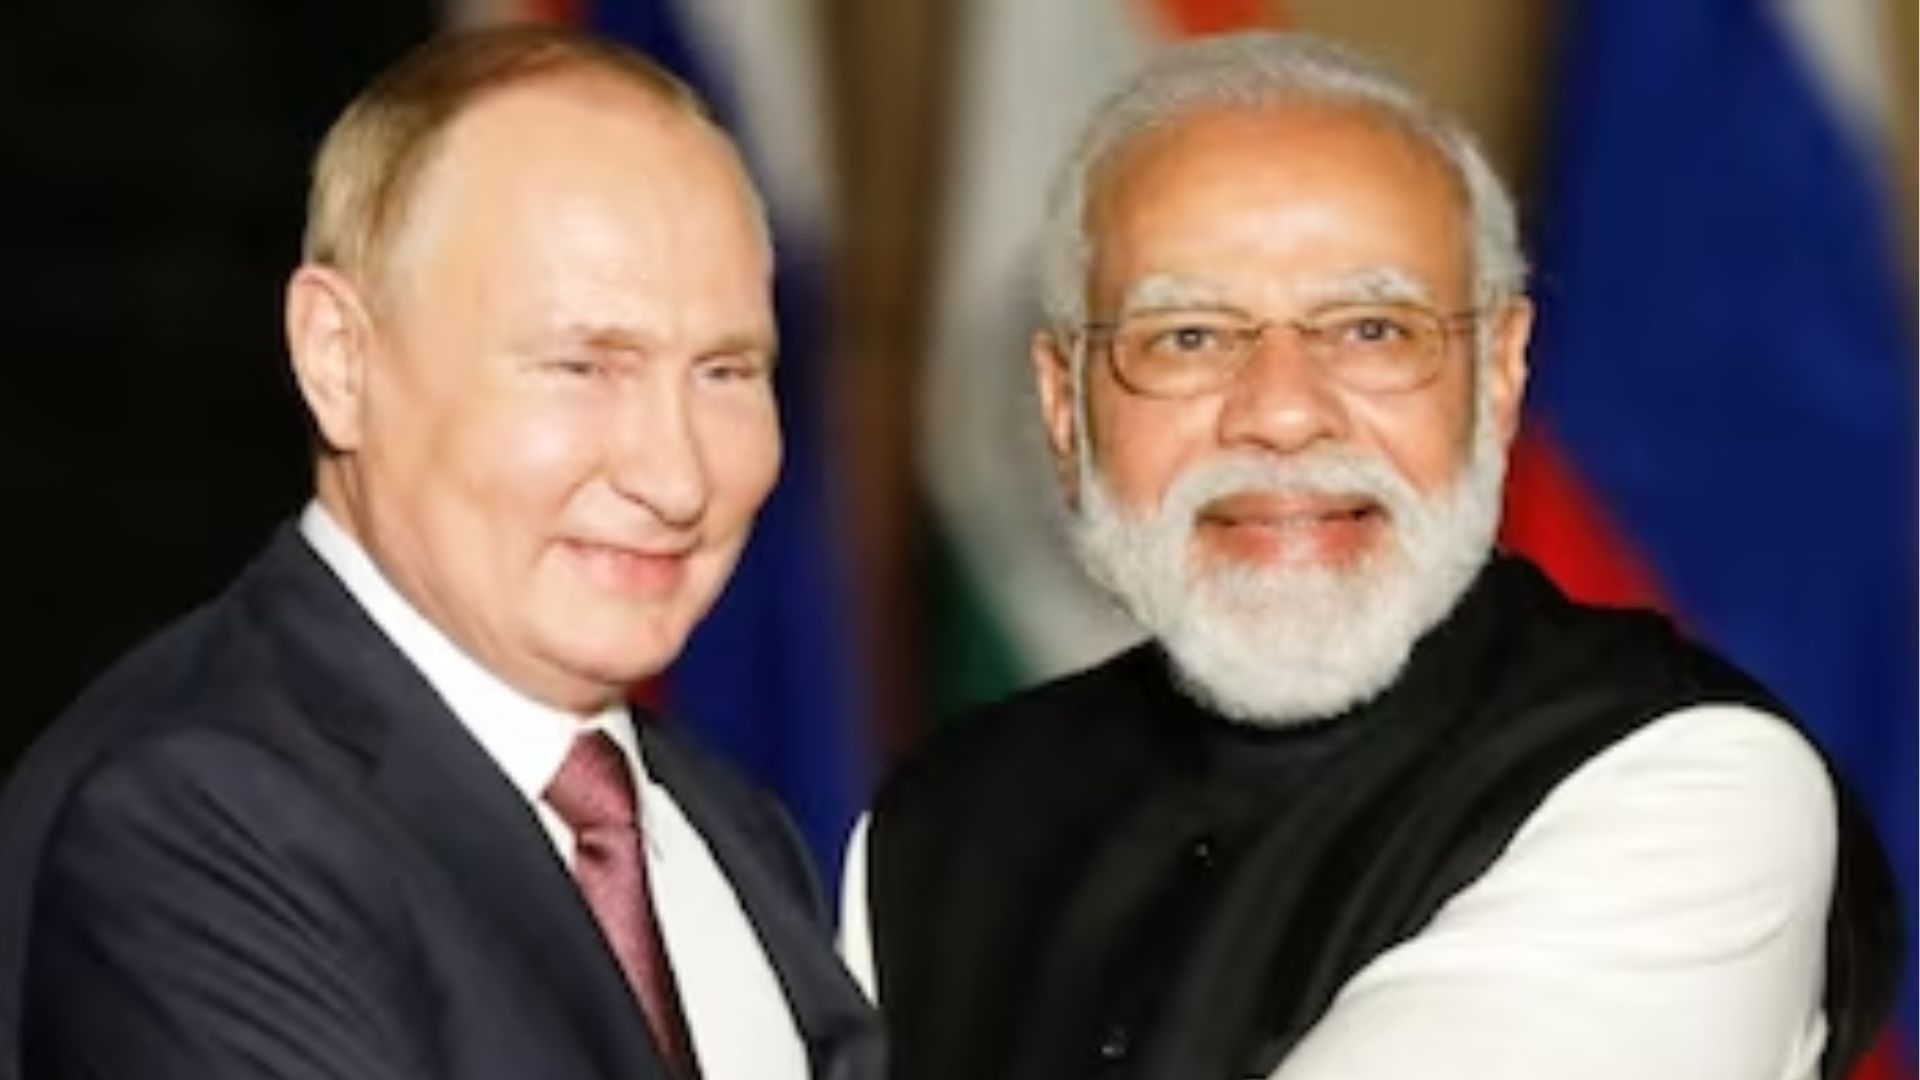 Vladimir Putin extends a special New Year message to India, PM Modi